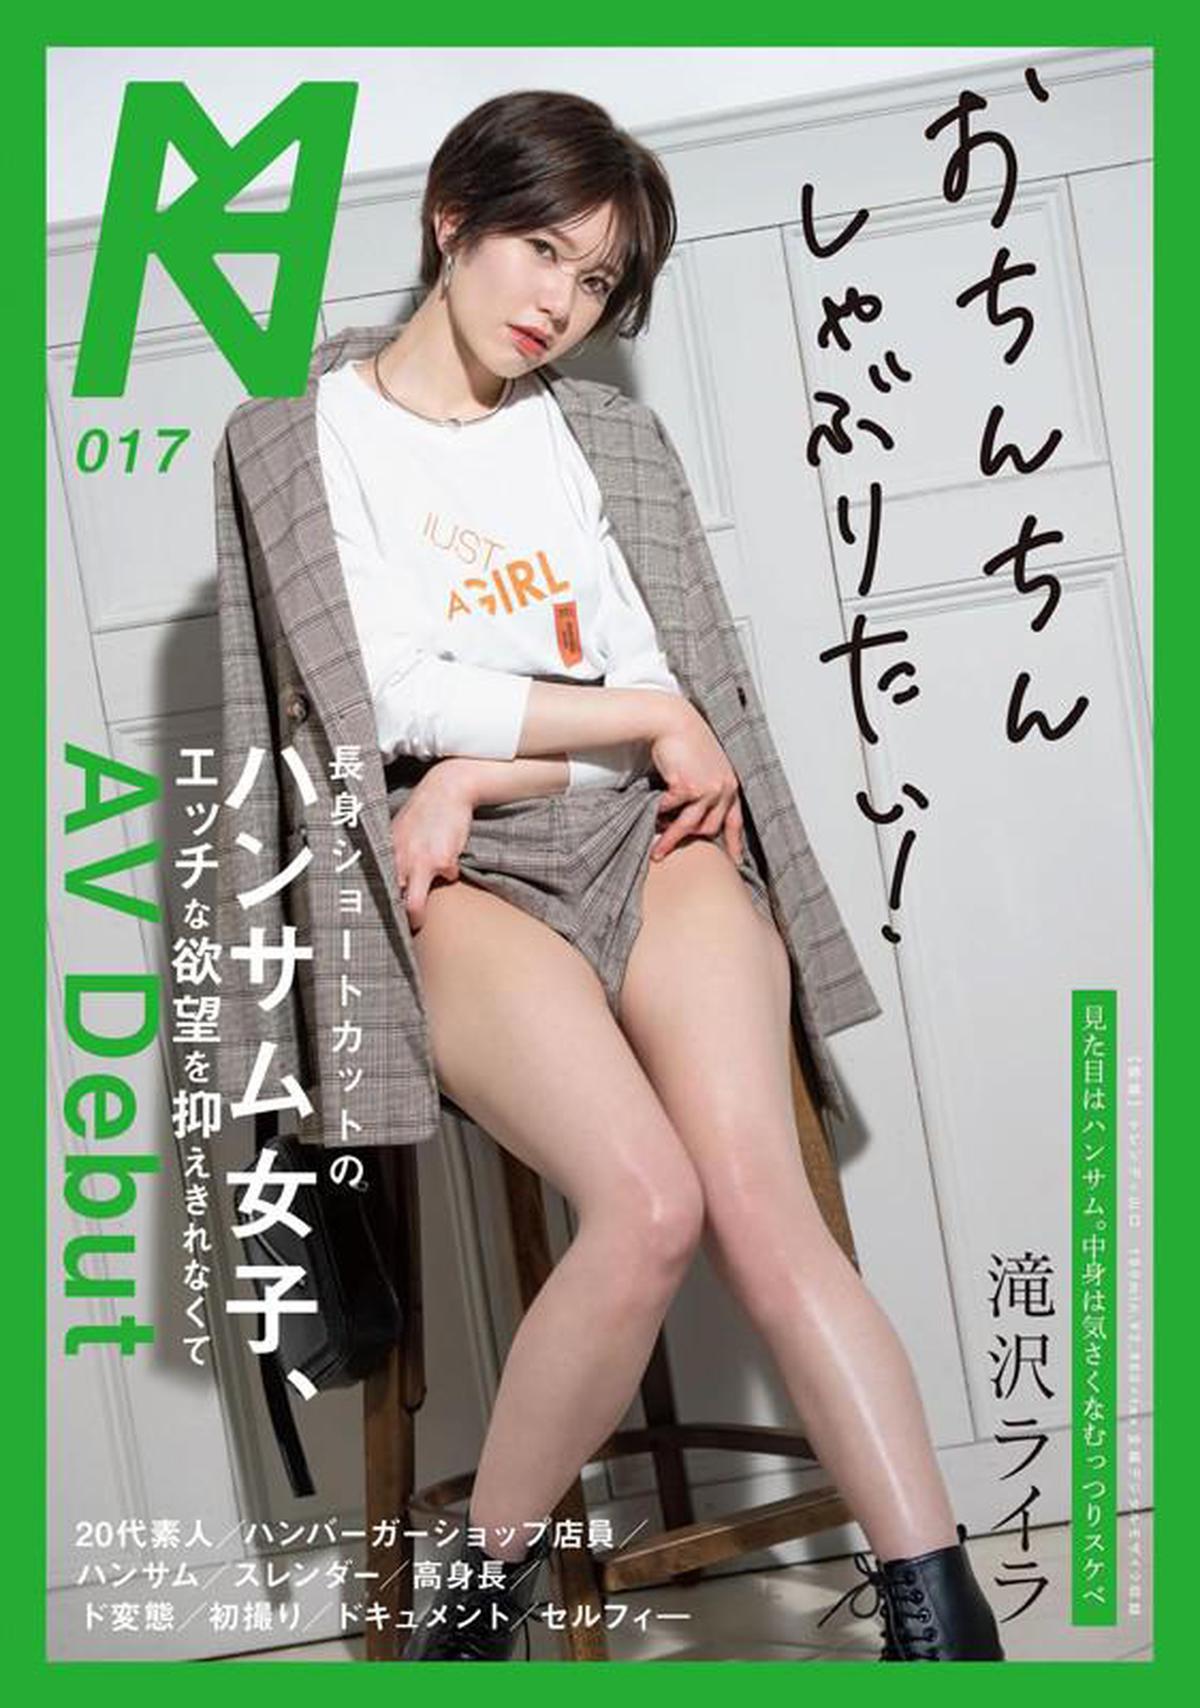 ENCODE720P KMHRS-020 Handsome Girl With Tall Shortcut, AV Debut Takizawa Laila Can't Suppress Her Naughty Desires